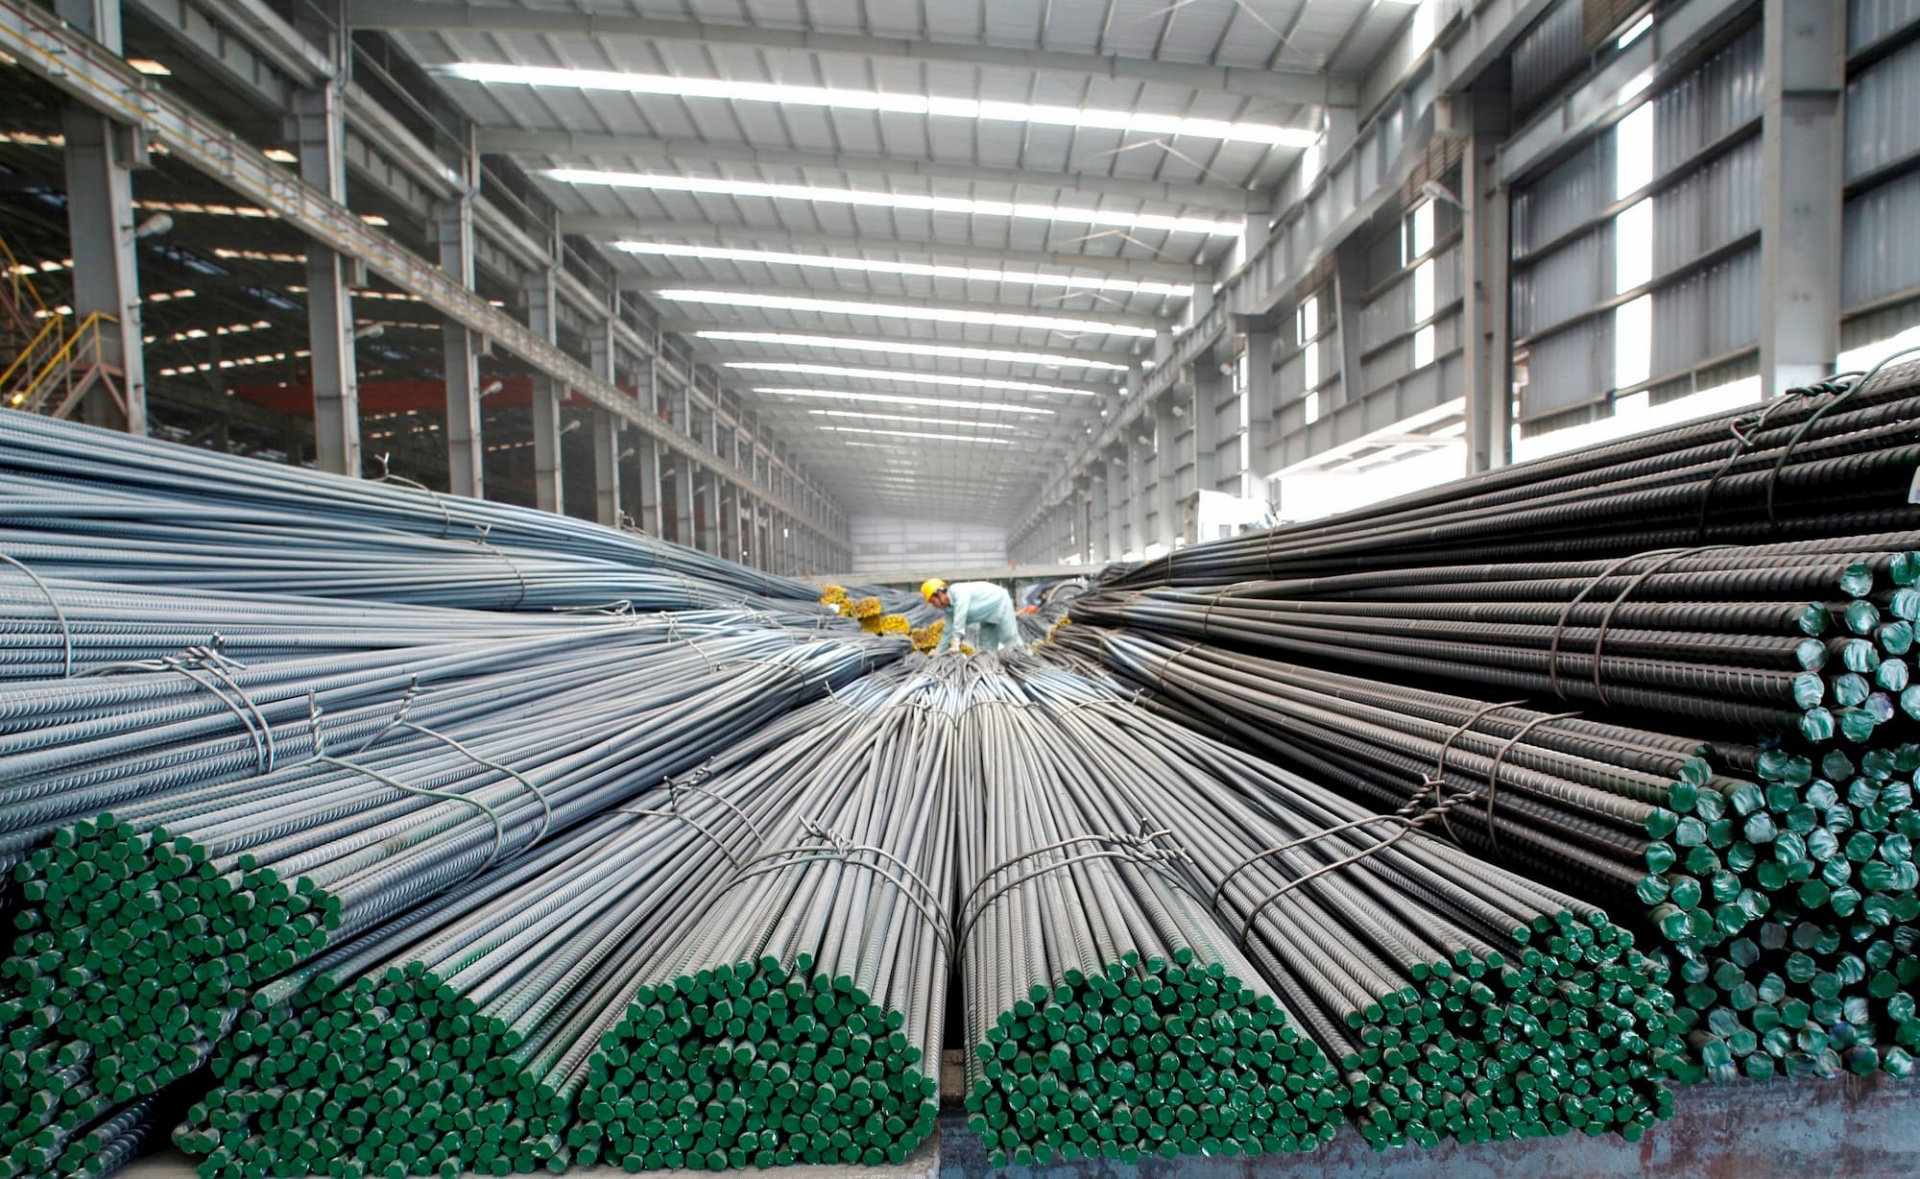 Steel imports subject to stricter quality standards